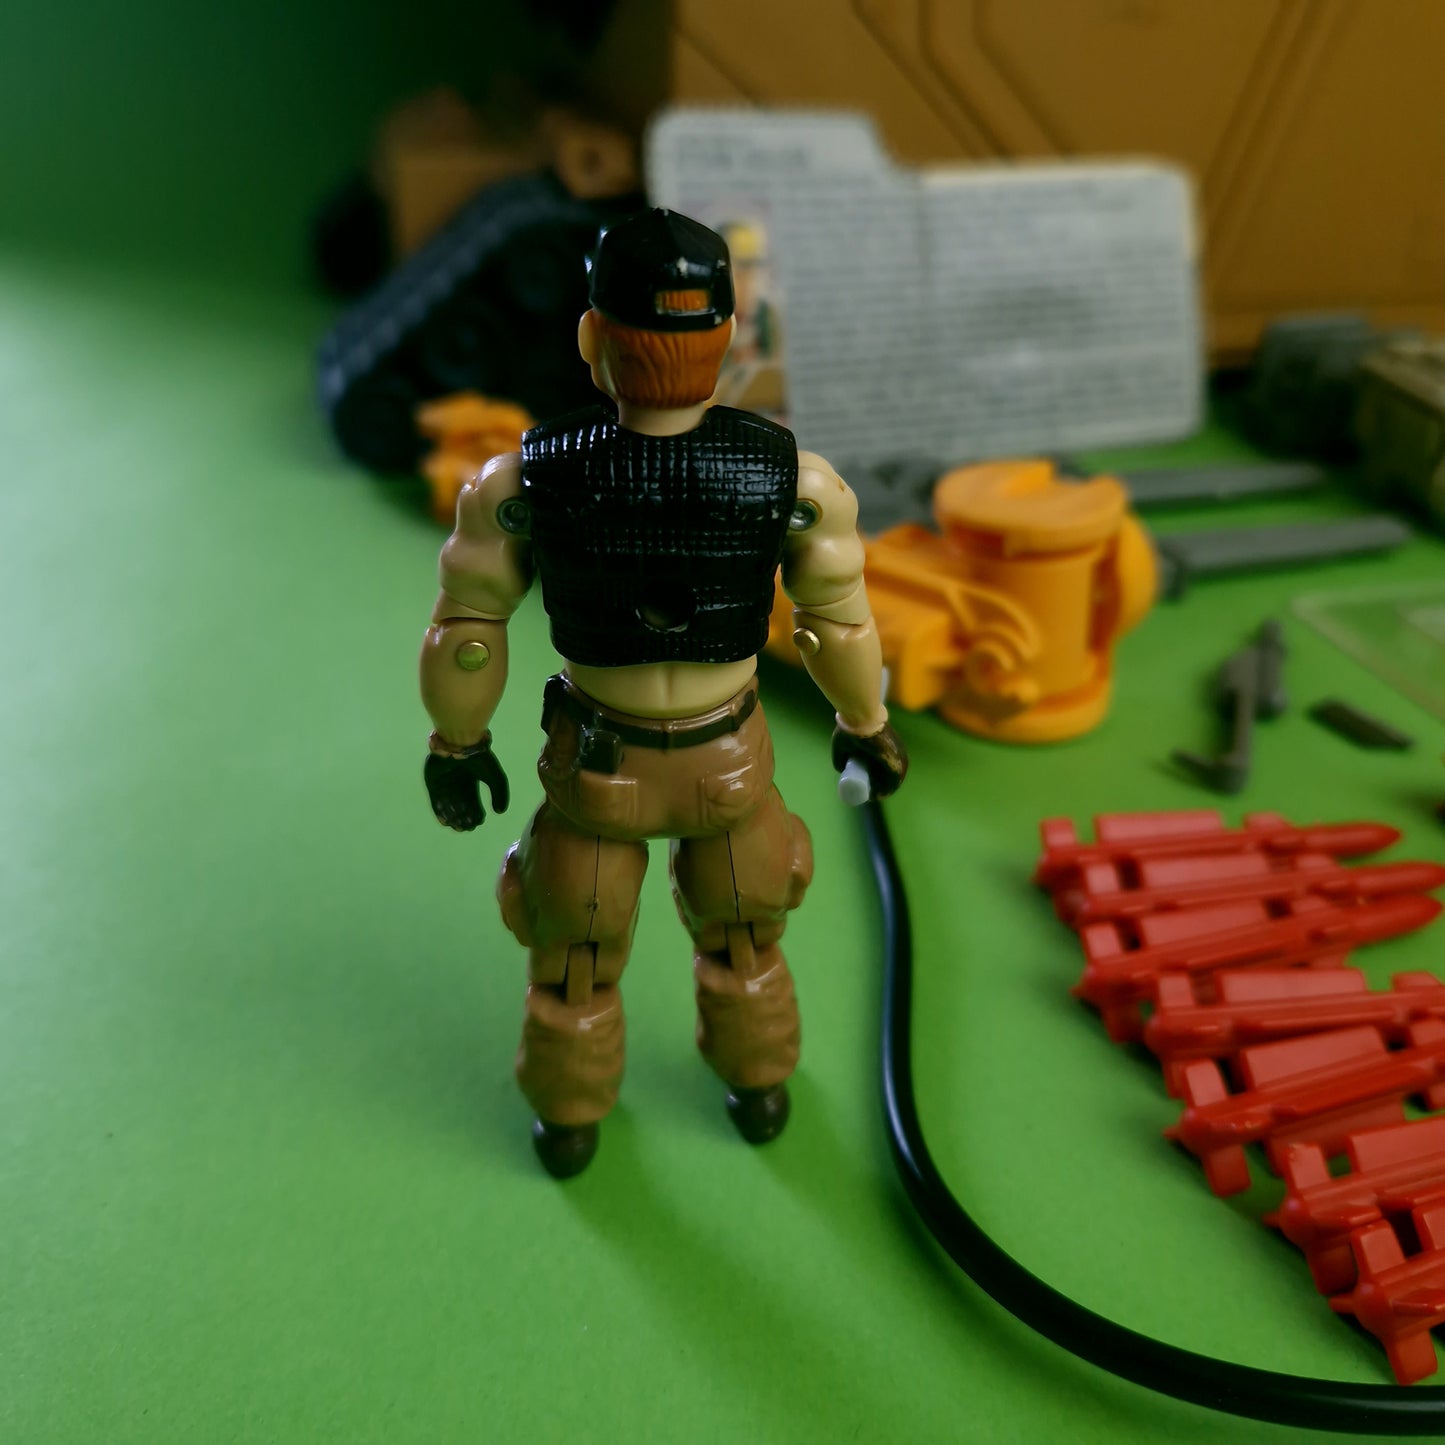 ACTION FORCE ☆ MOBILE COMMAND CENTRE with STEAM ROLLER Action Figure ☆ Vintage G.I Joe Hasbro 1987